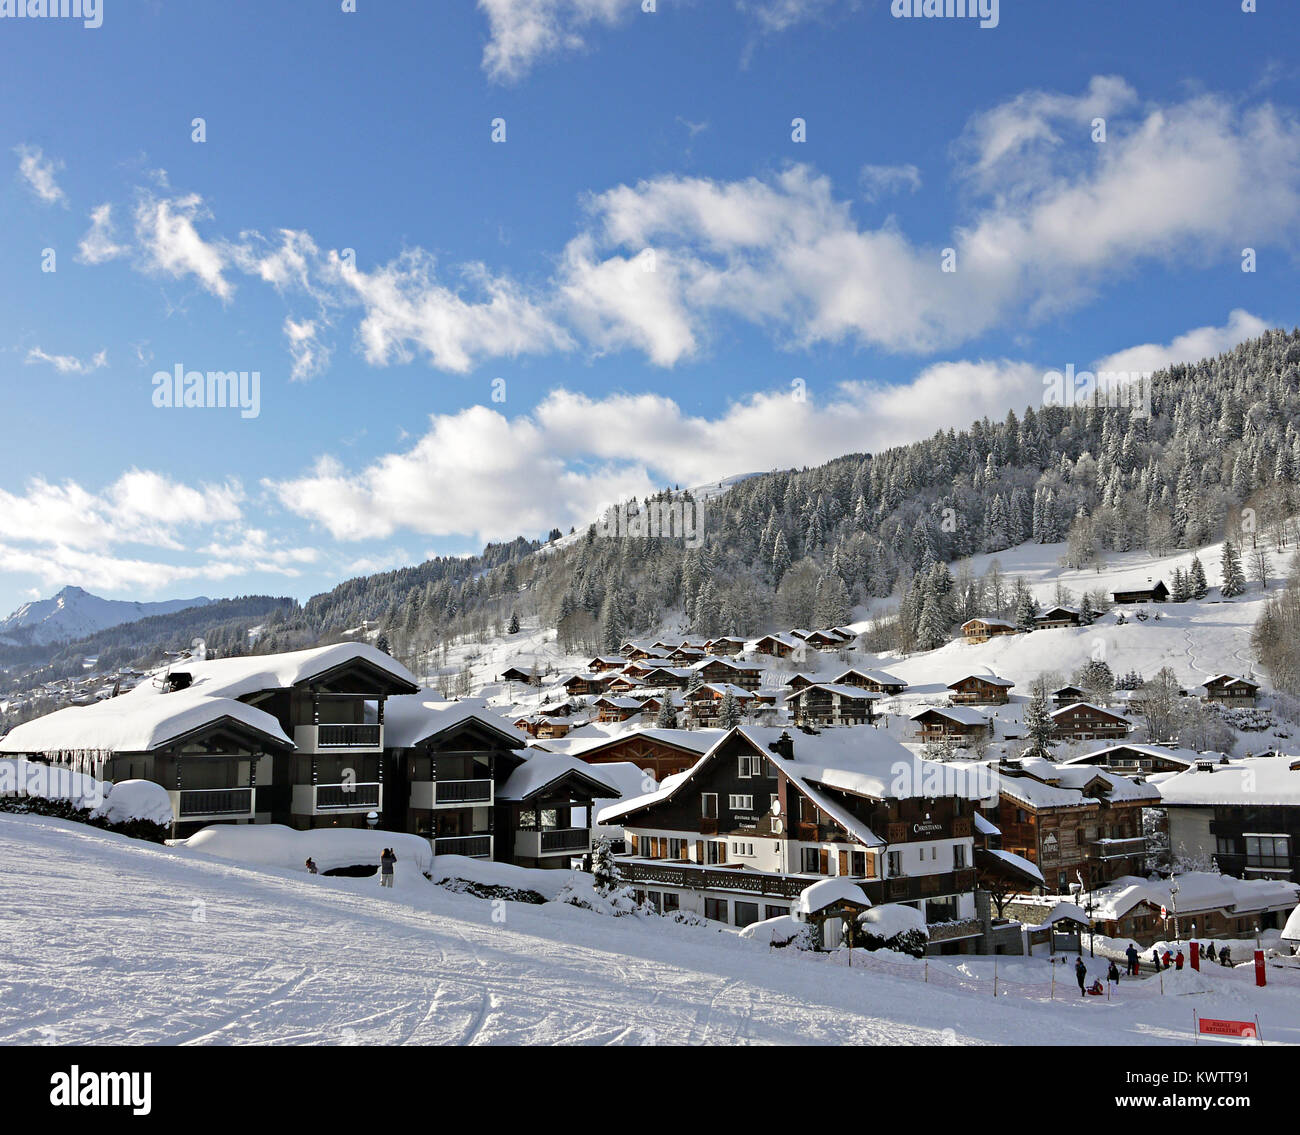 Winter scenes and showing the Hotel Christiana in the ski and snowboarding resort of Les Gets, France Stock Photo